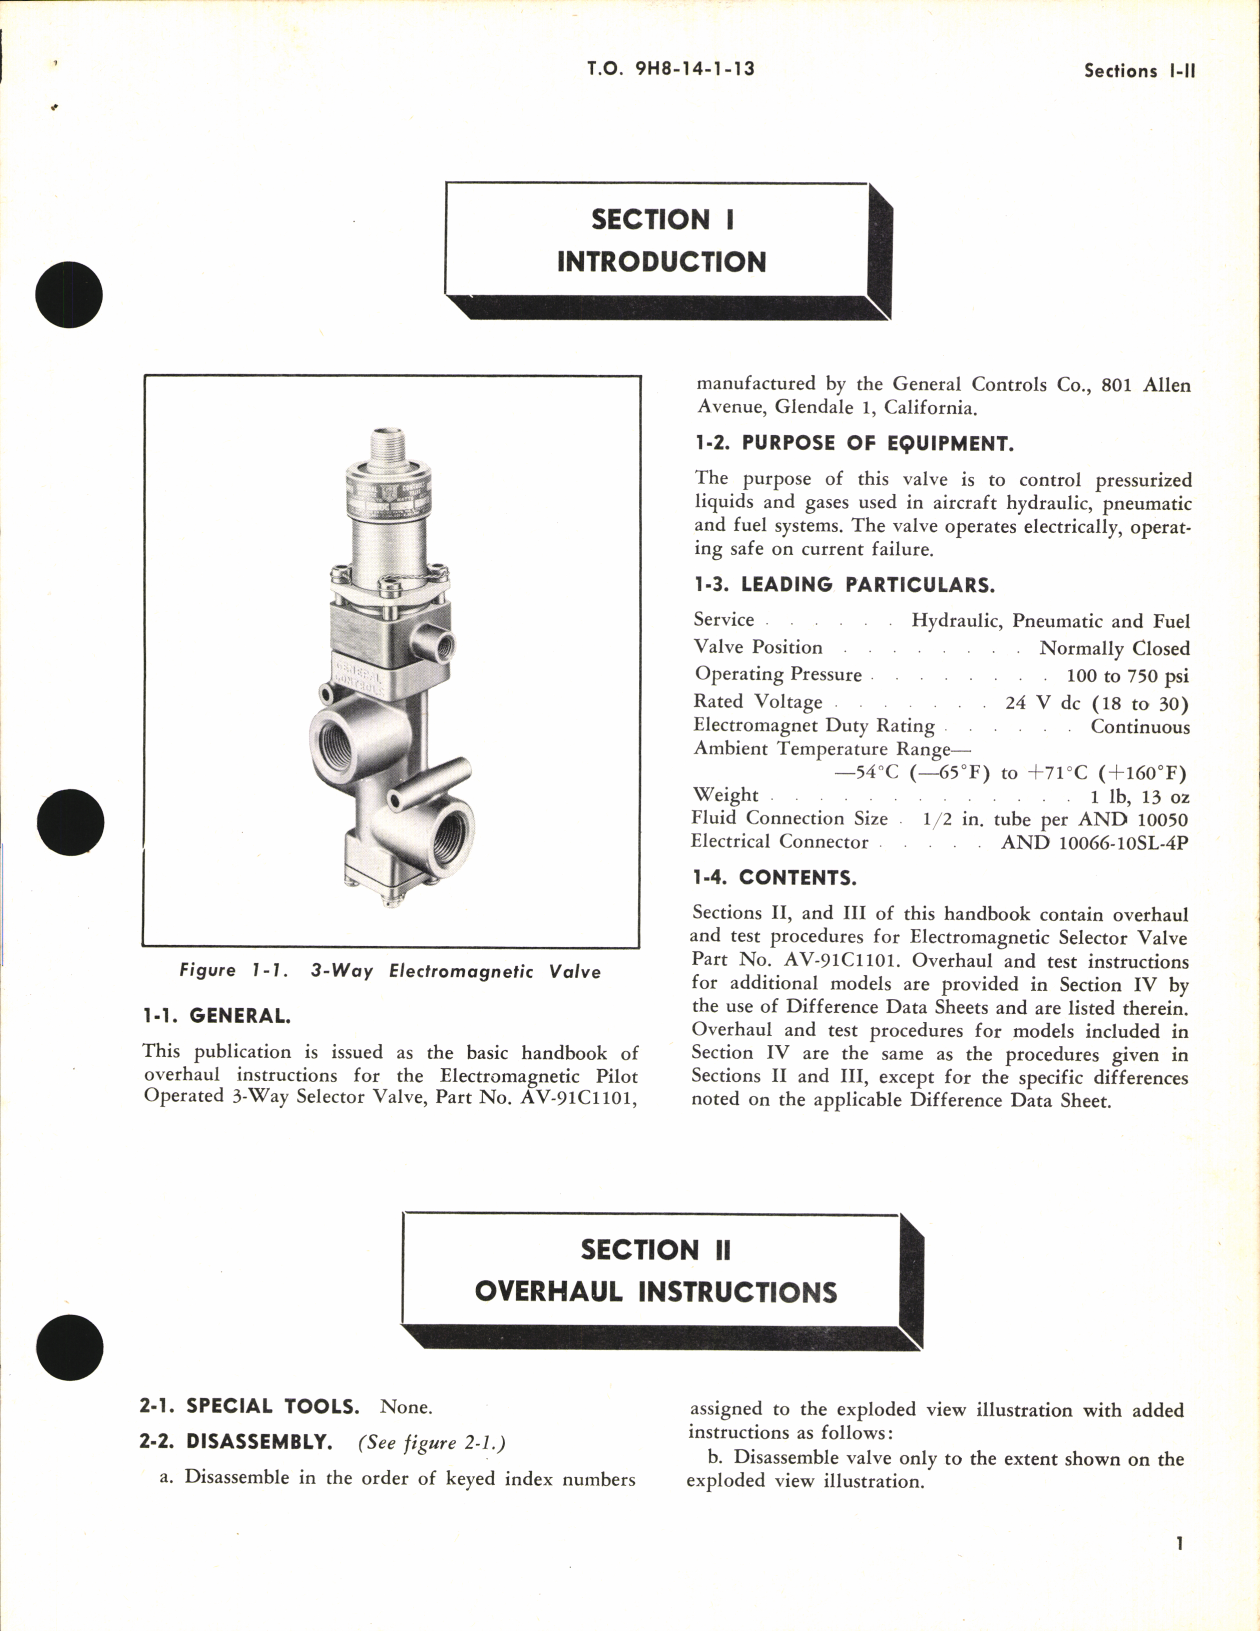 Sample page 5 from AirCorps Library document: Handbook of Overhaul Instructions for Electromagnetic Pilot Operated 3-Way Selector Valve